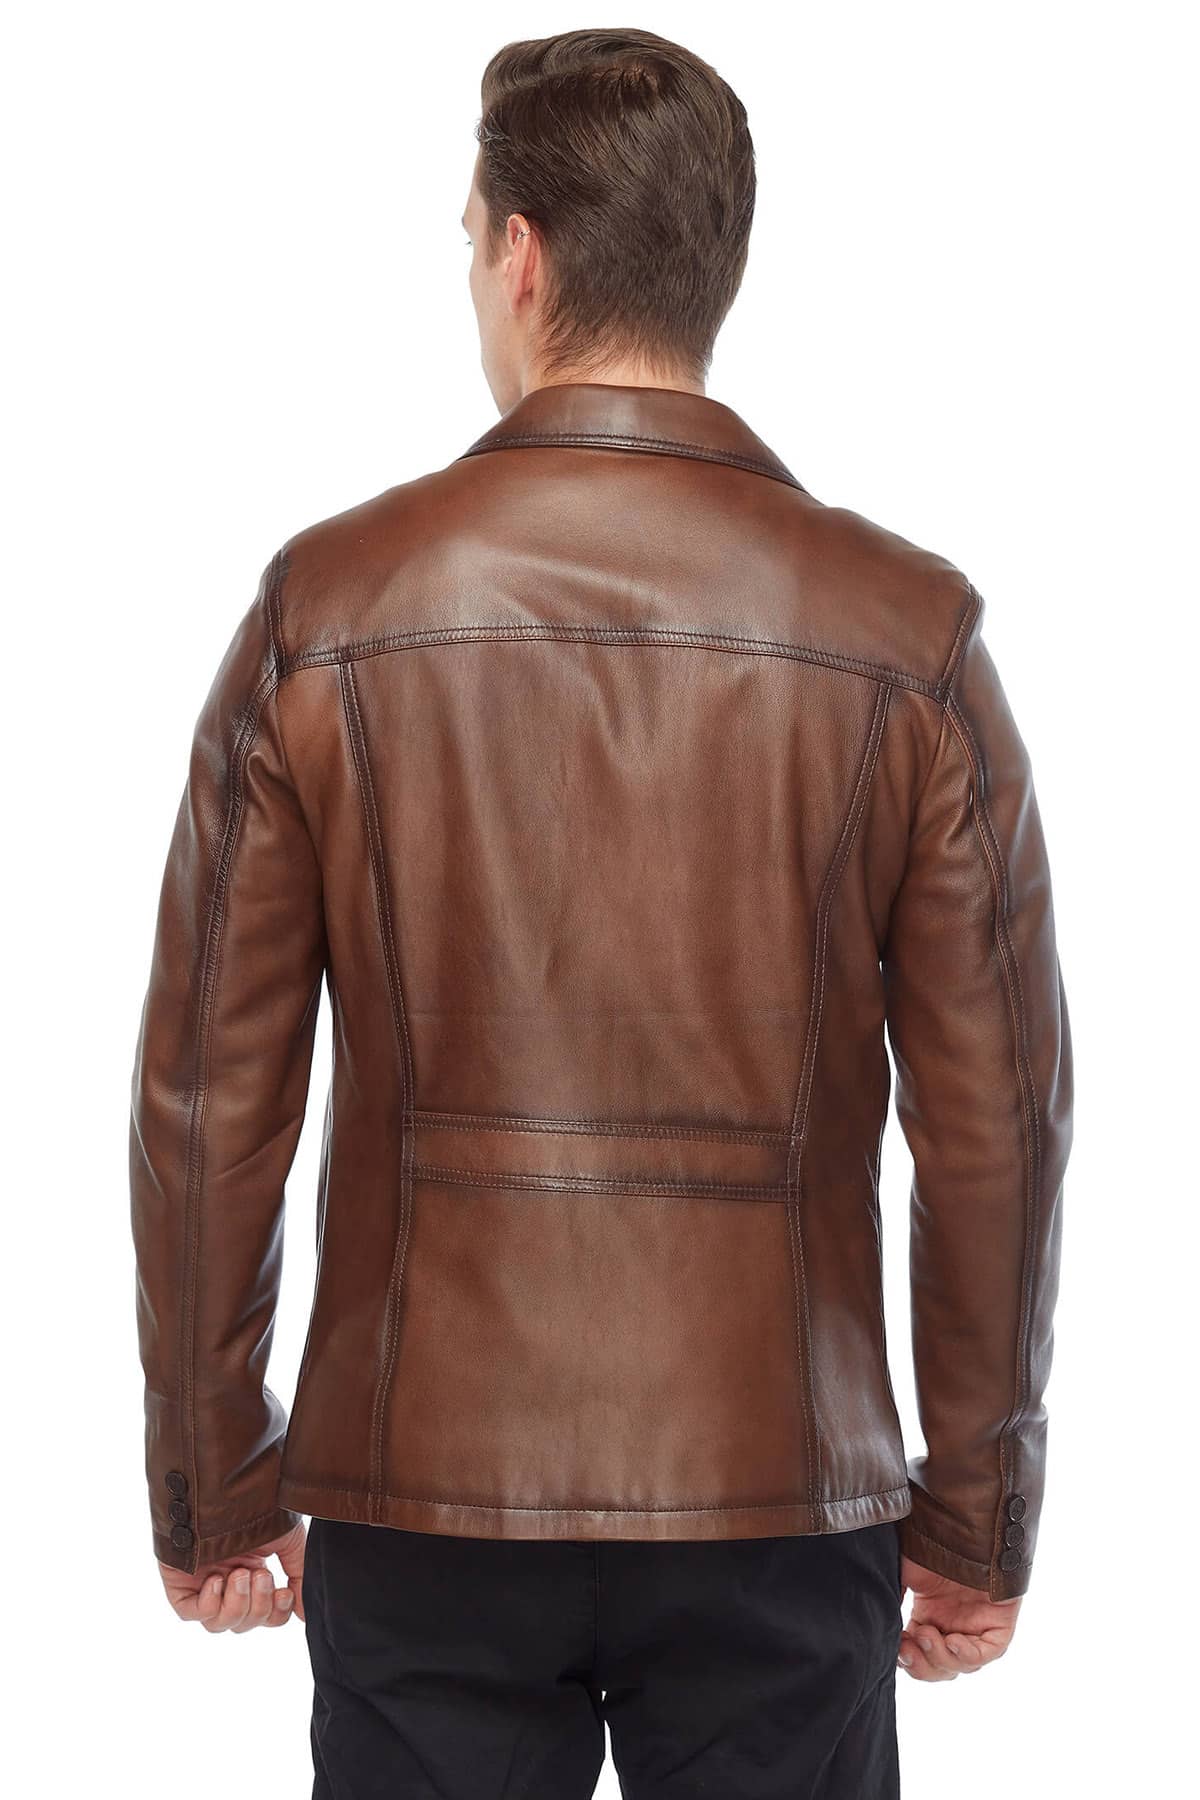 Charley Speed Men’s Leather Coat Brown Back